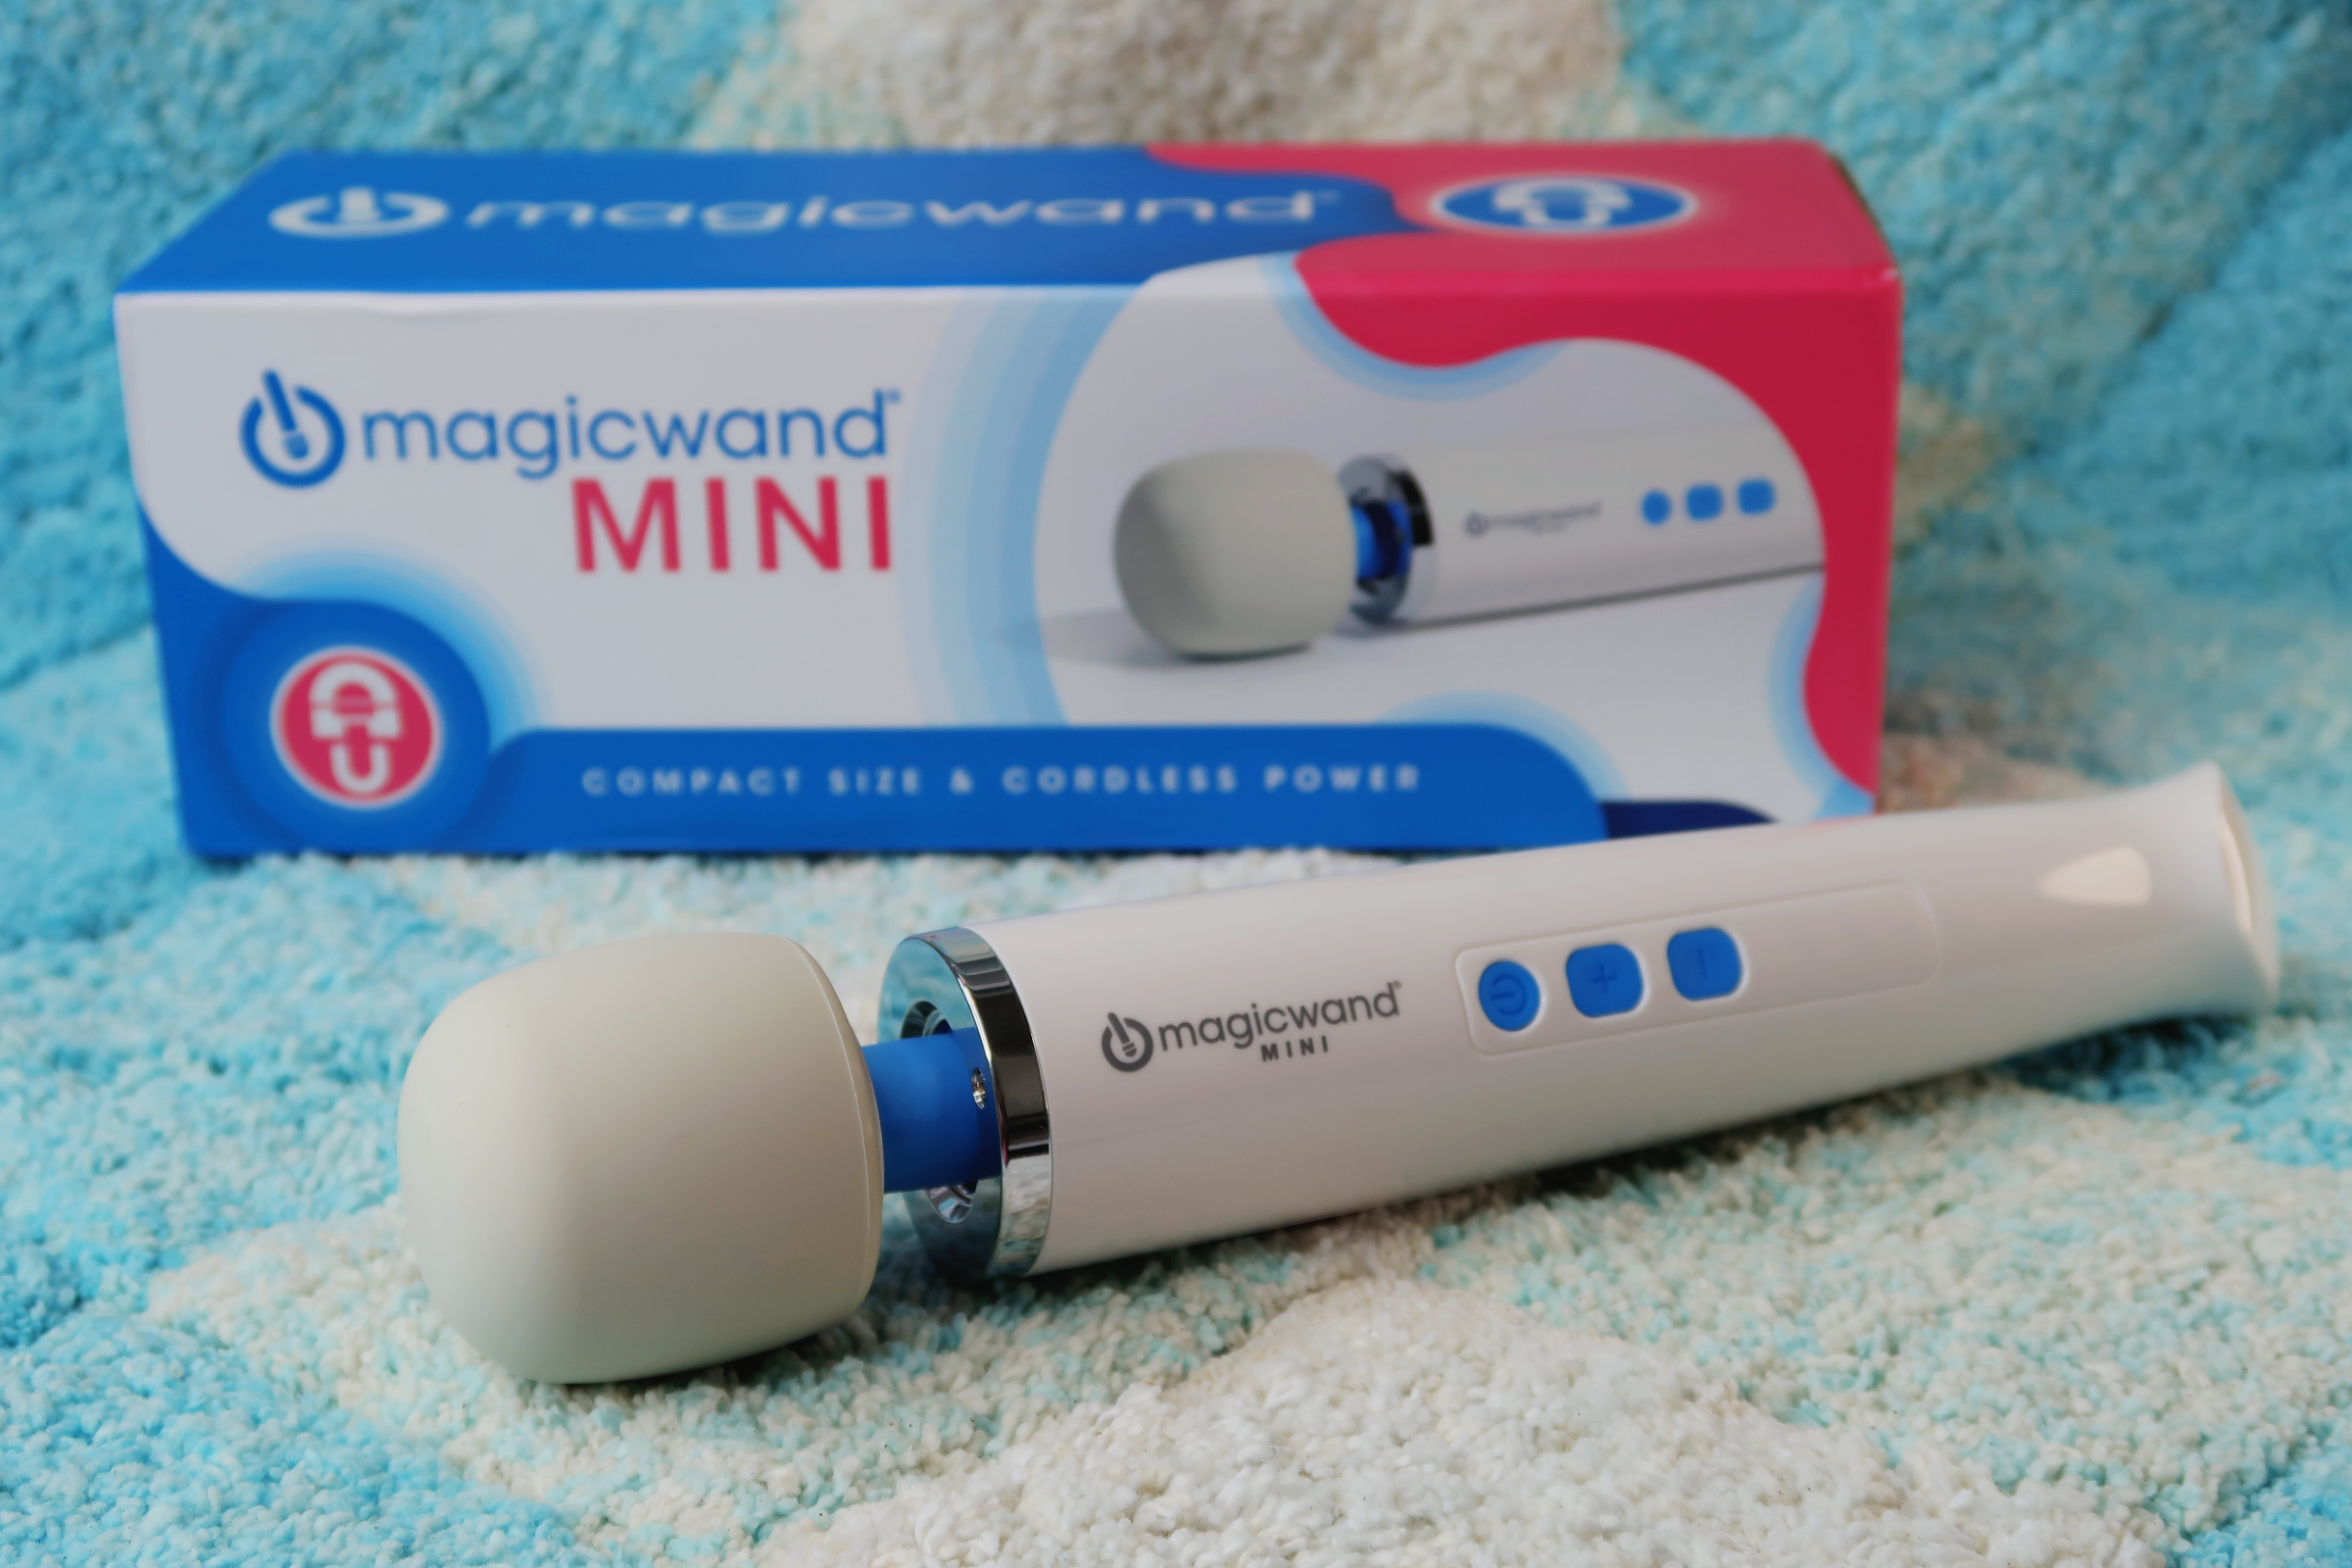 The Magic Wand Mini Original posed with its packaging.